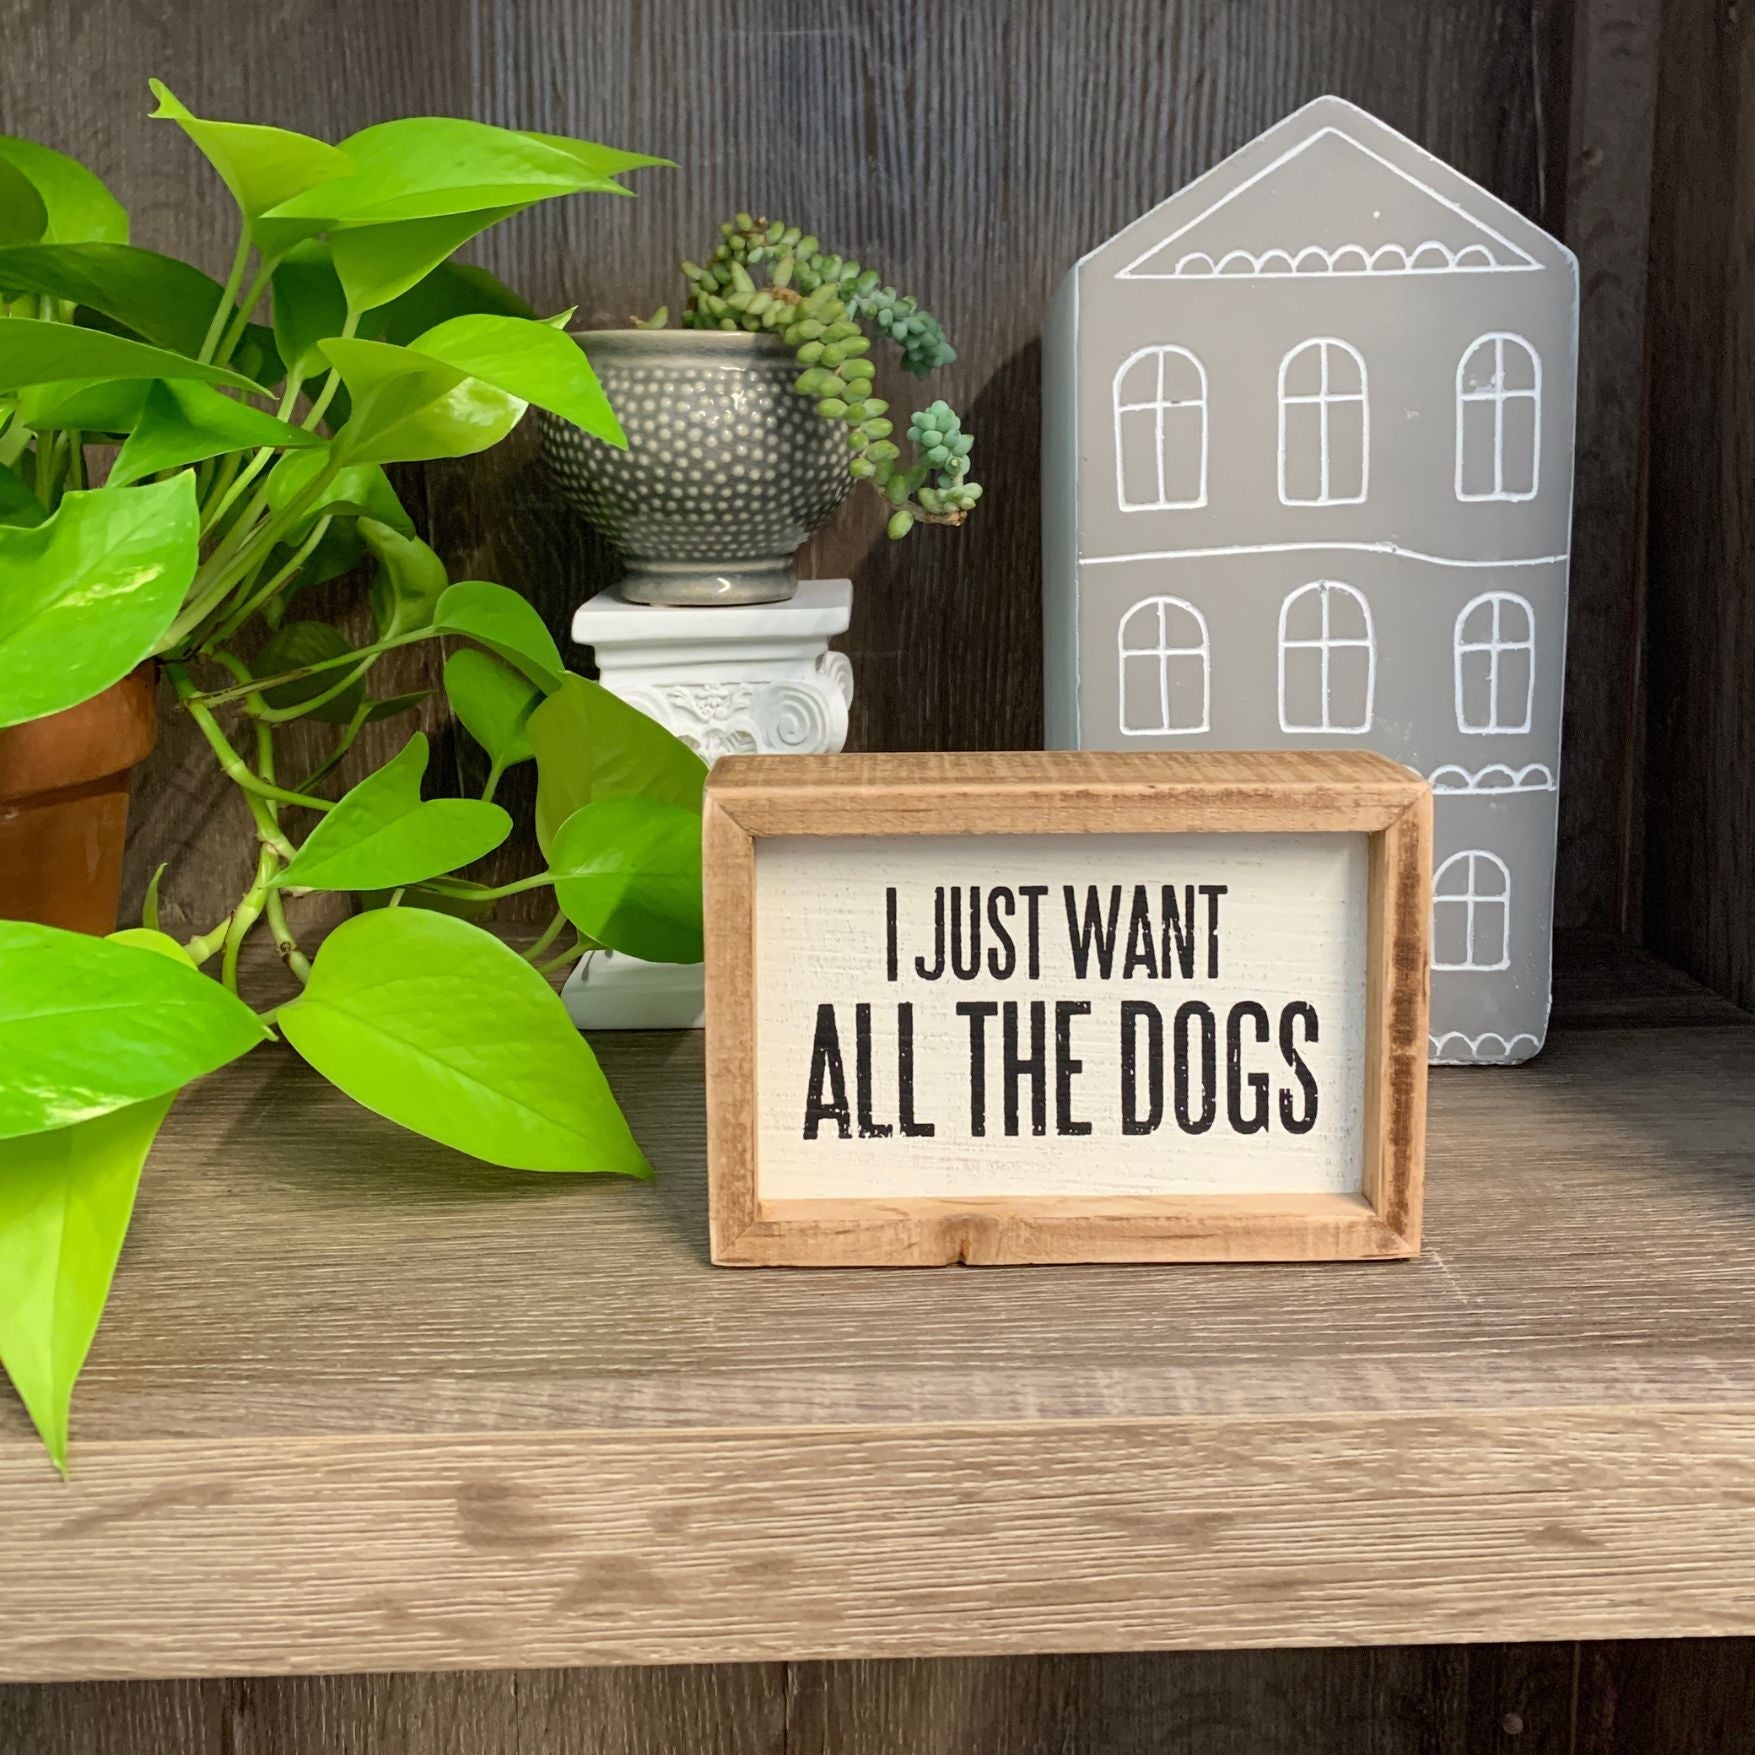 I Just Want All The Dogs Inset Box Sign | Wall Desk Hanging Wood Decor | 5.50" x 3.75"